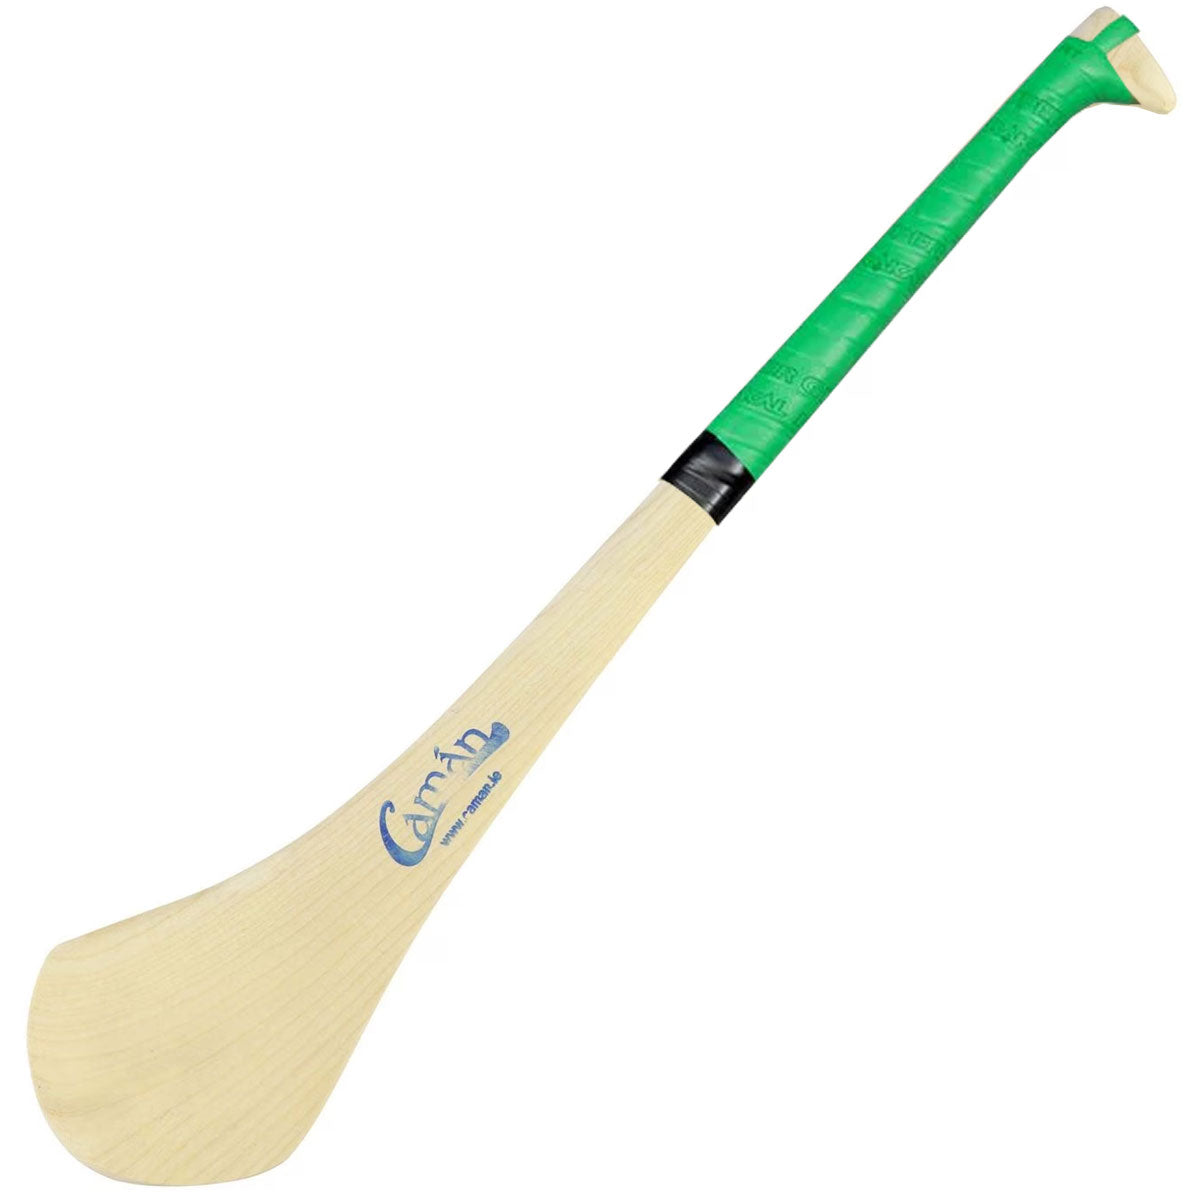 Caman Hurling Stick size 34 (Inches)